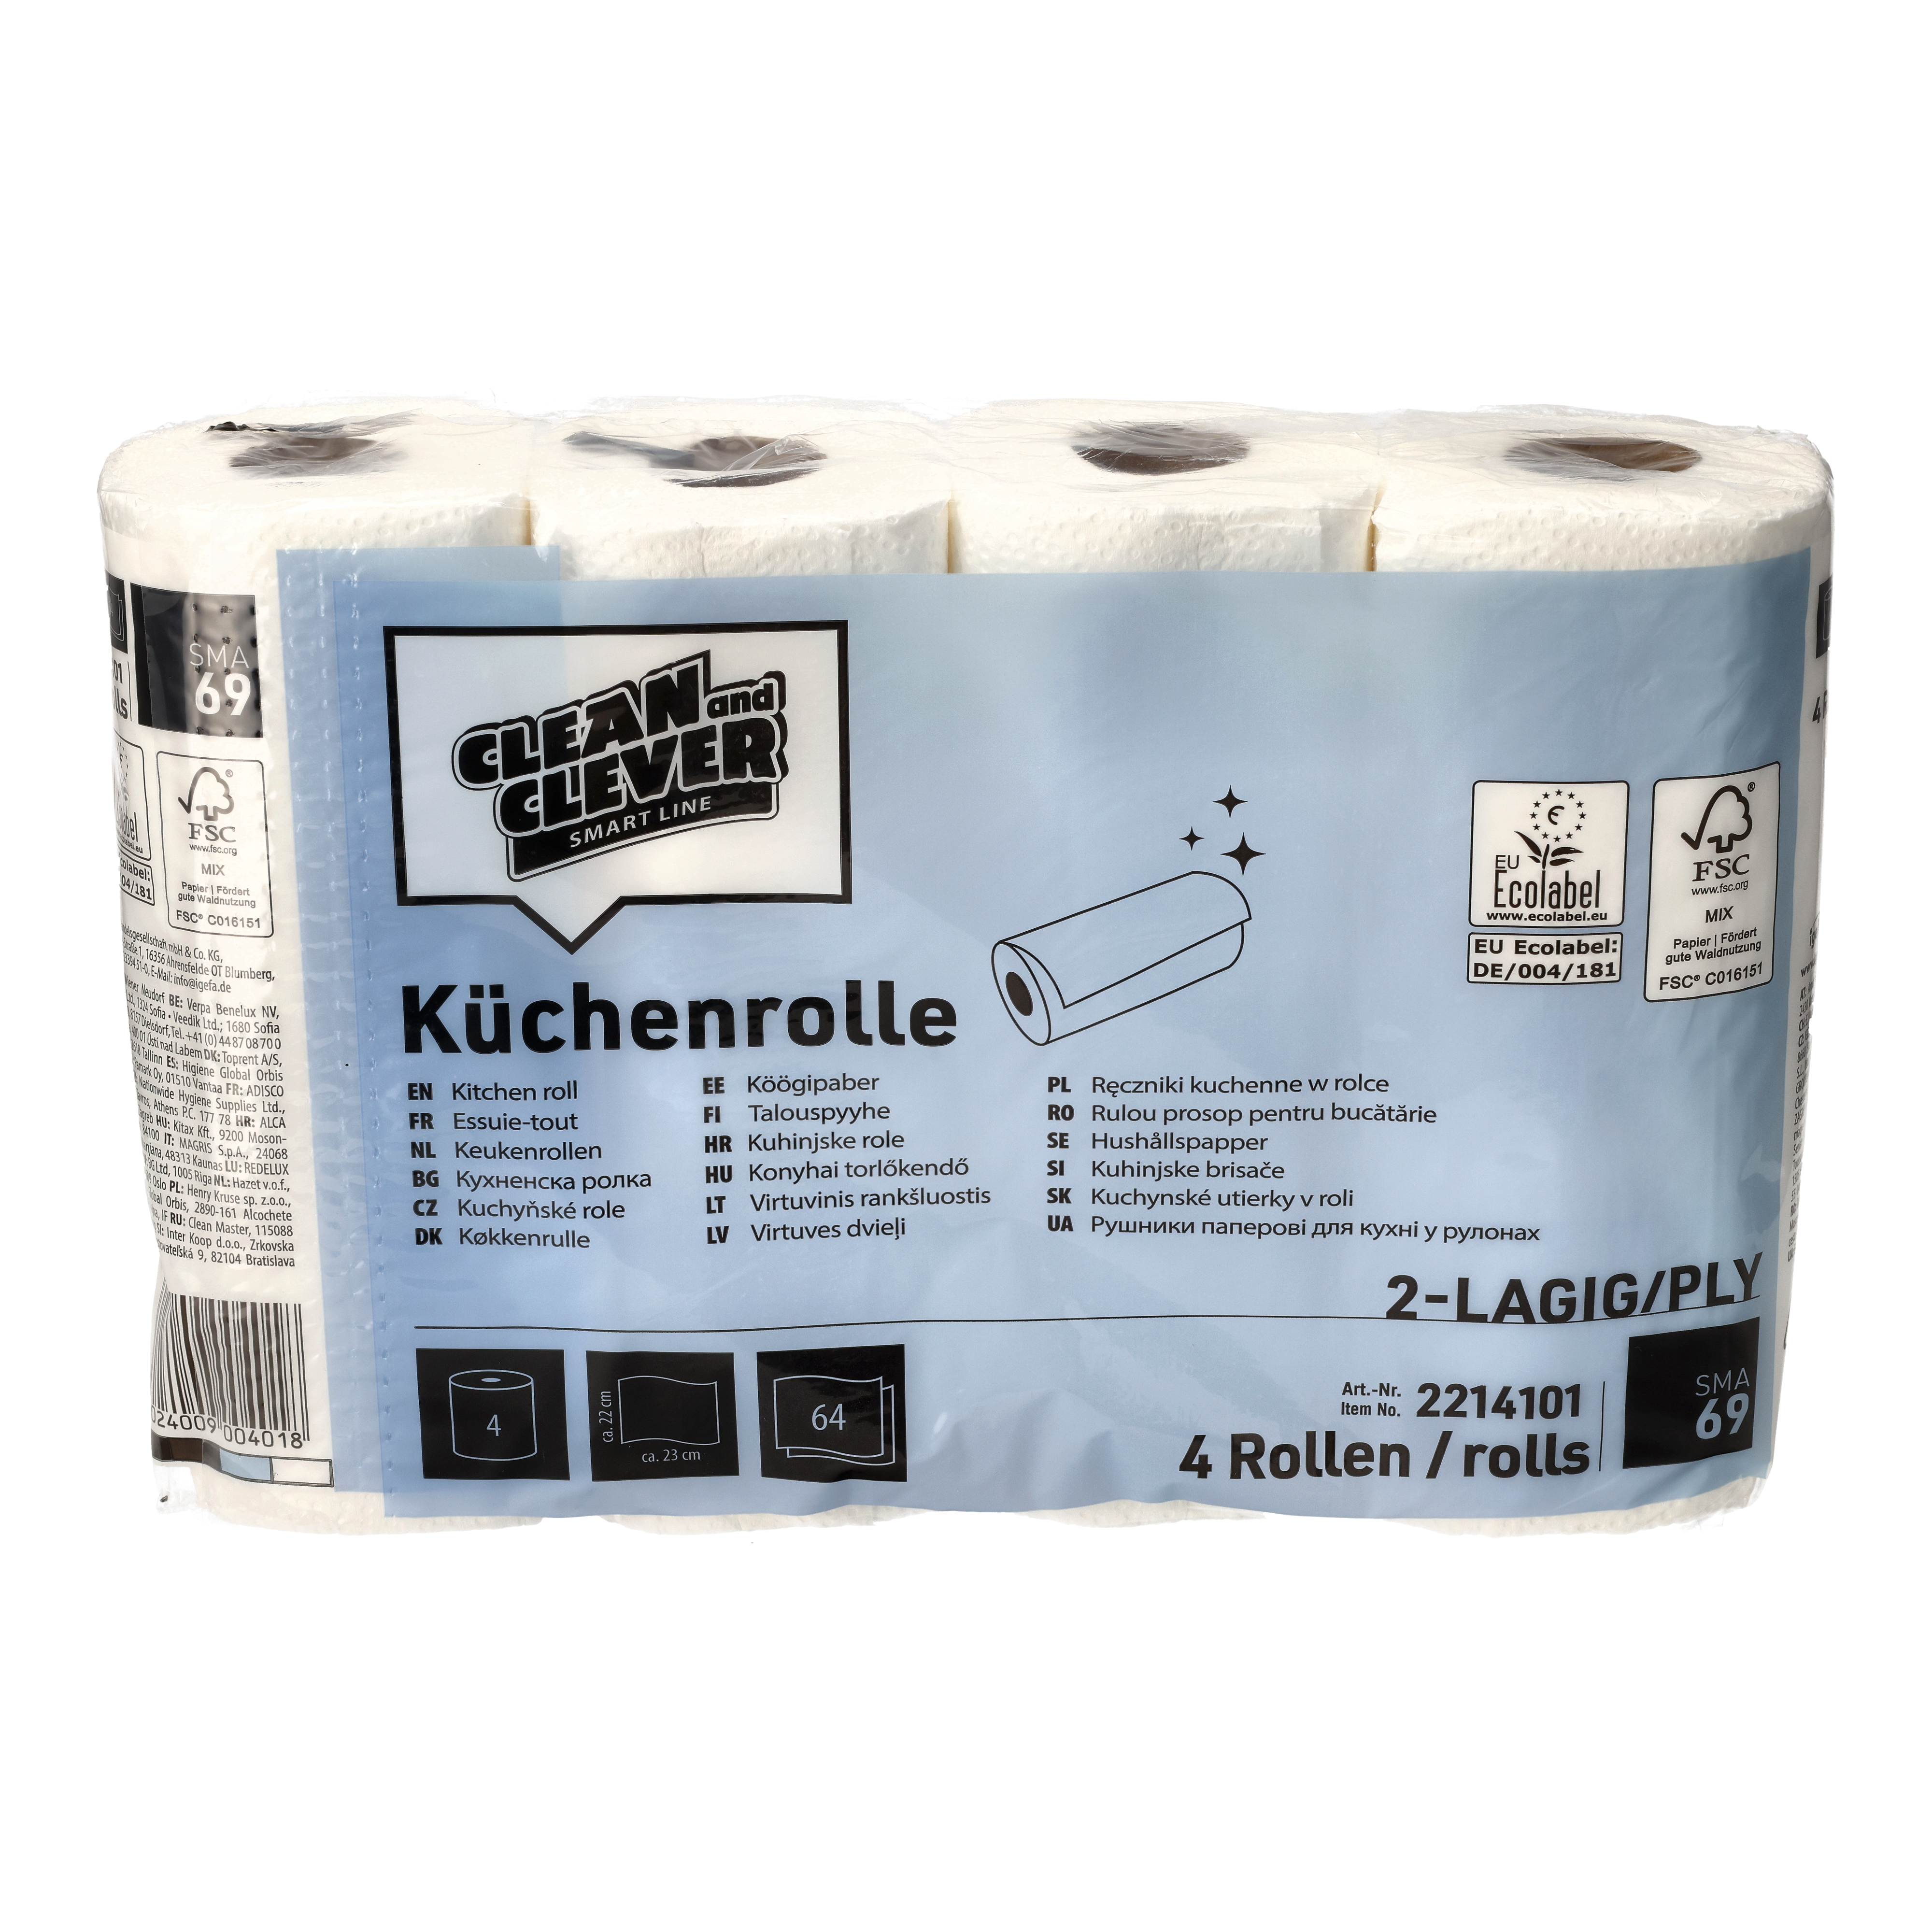 CLEAN and CLEVER SMART Küchenrolle SMA69 - 2-lagig